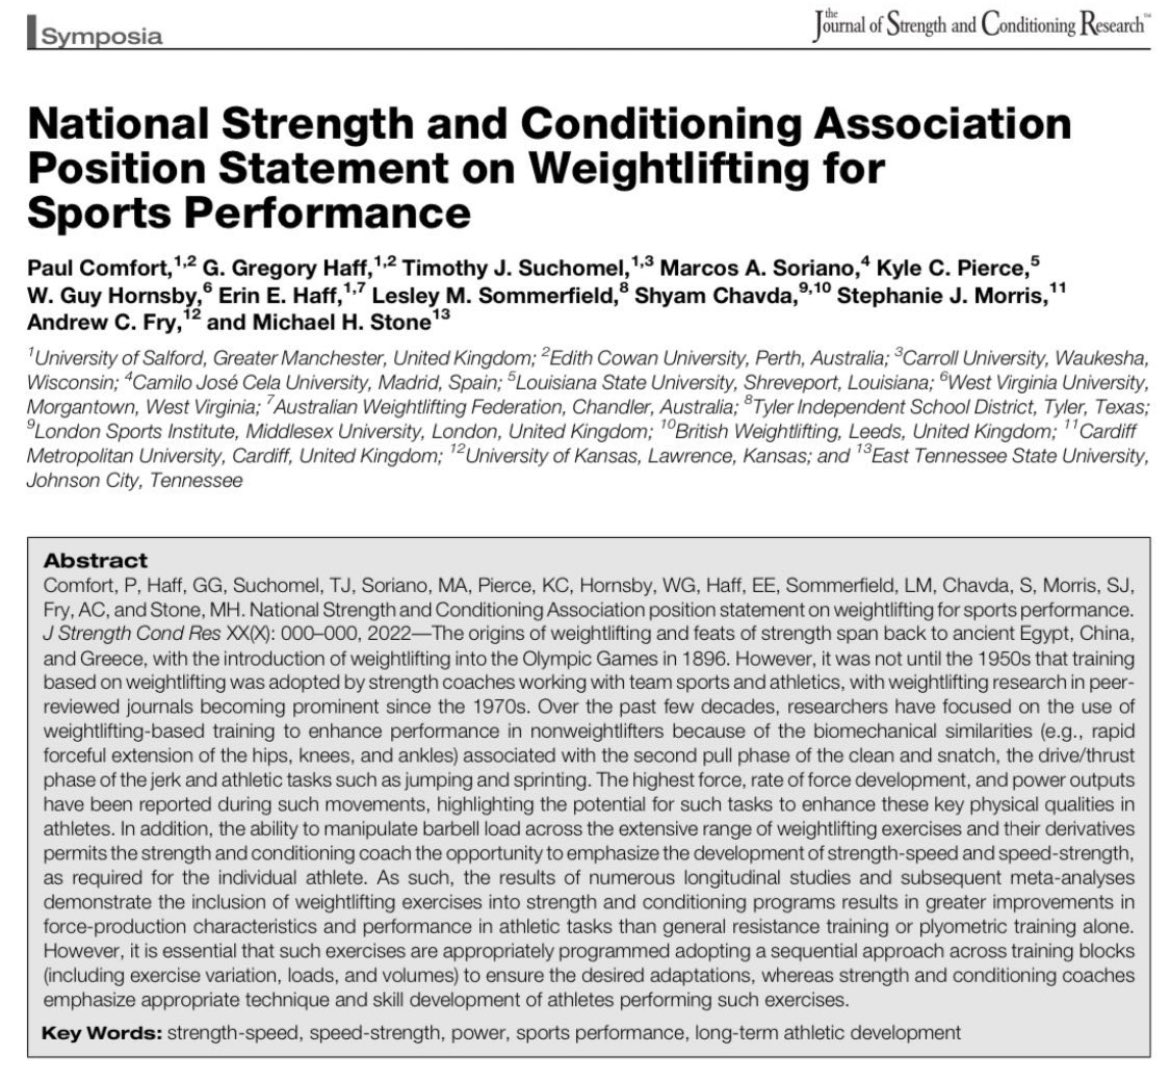 Insight into considerations for weightlifting and its contribution to LTAD found in the NSCA's Position on Weightlifting for Sports Performance. Watch for the full paper coming to @Jscronline in June. bit.ly/3ndZgvv